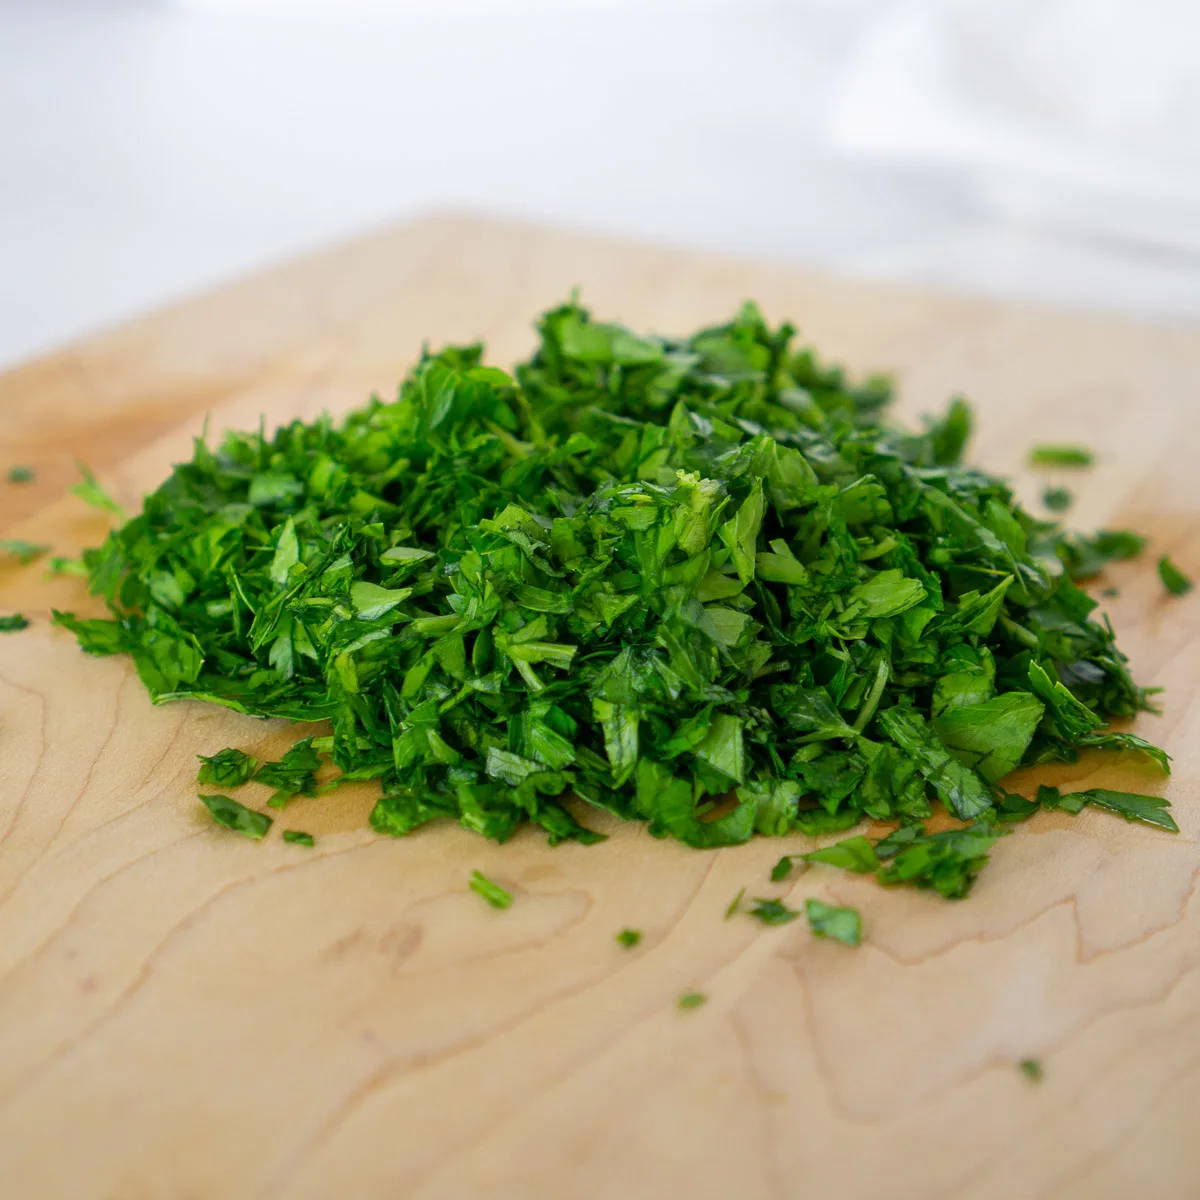 diced parsley and mint